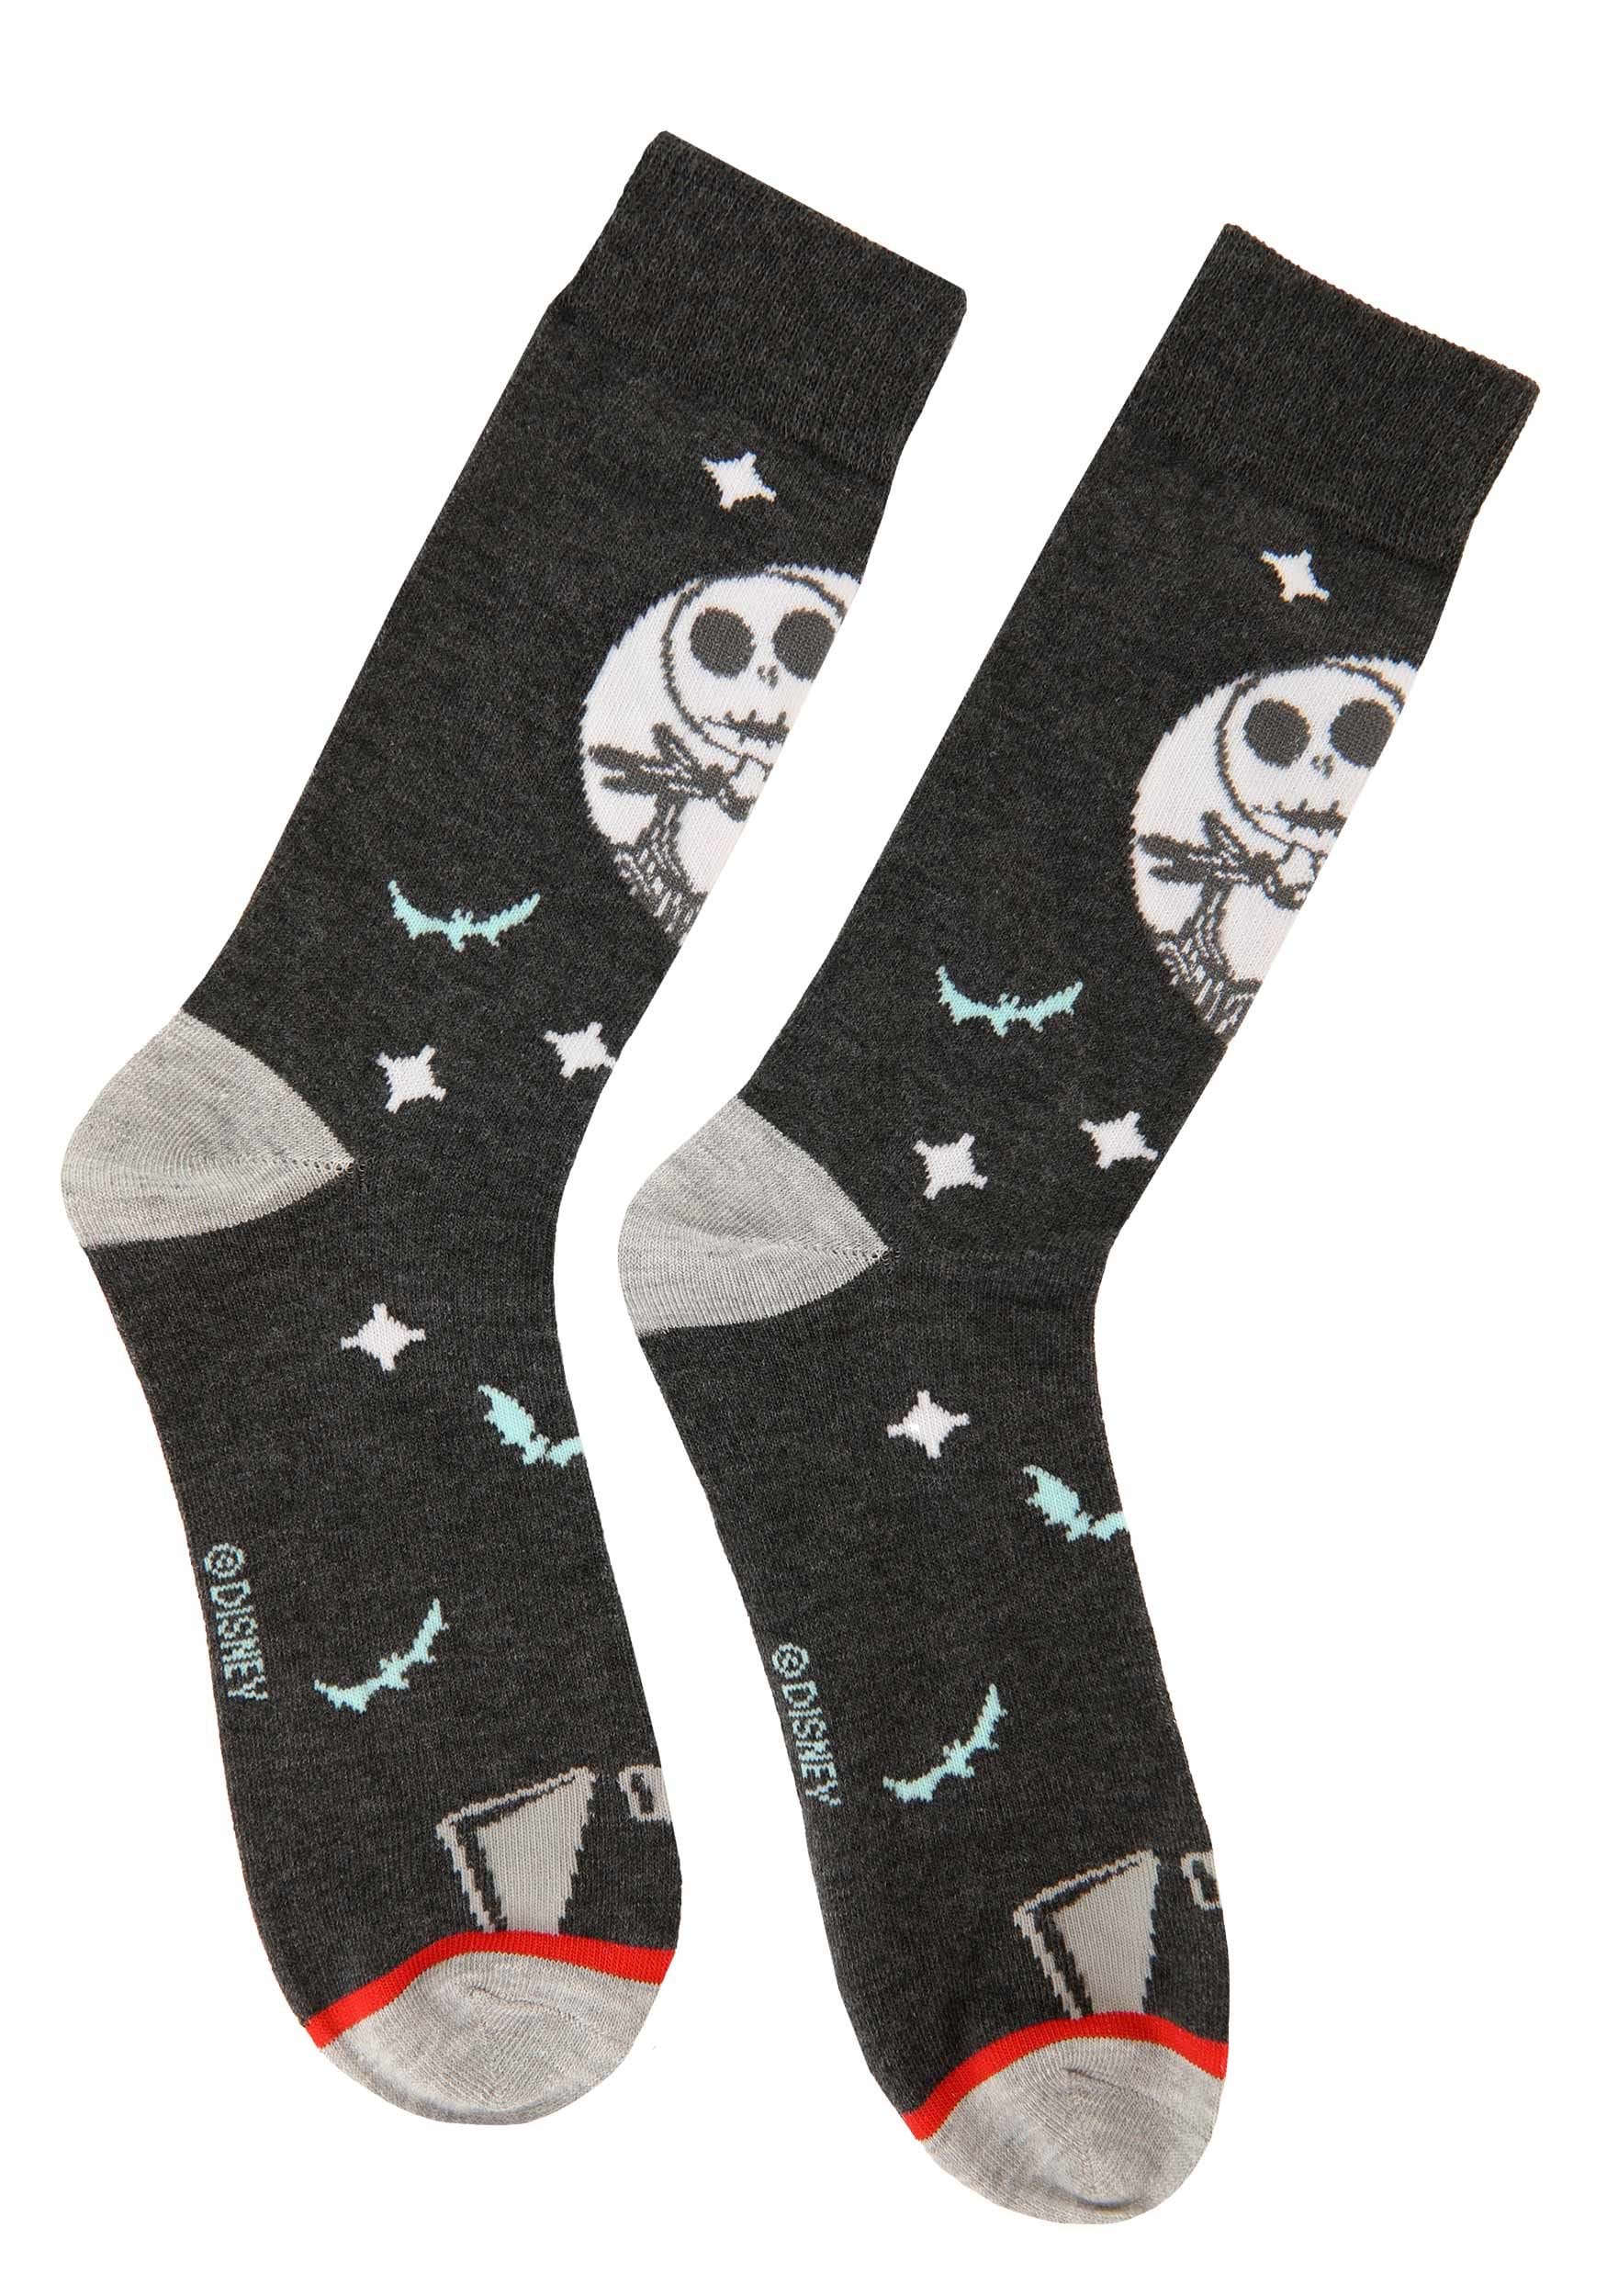 Adult Jack and Sally 3 Pair Casual Socks Pack